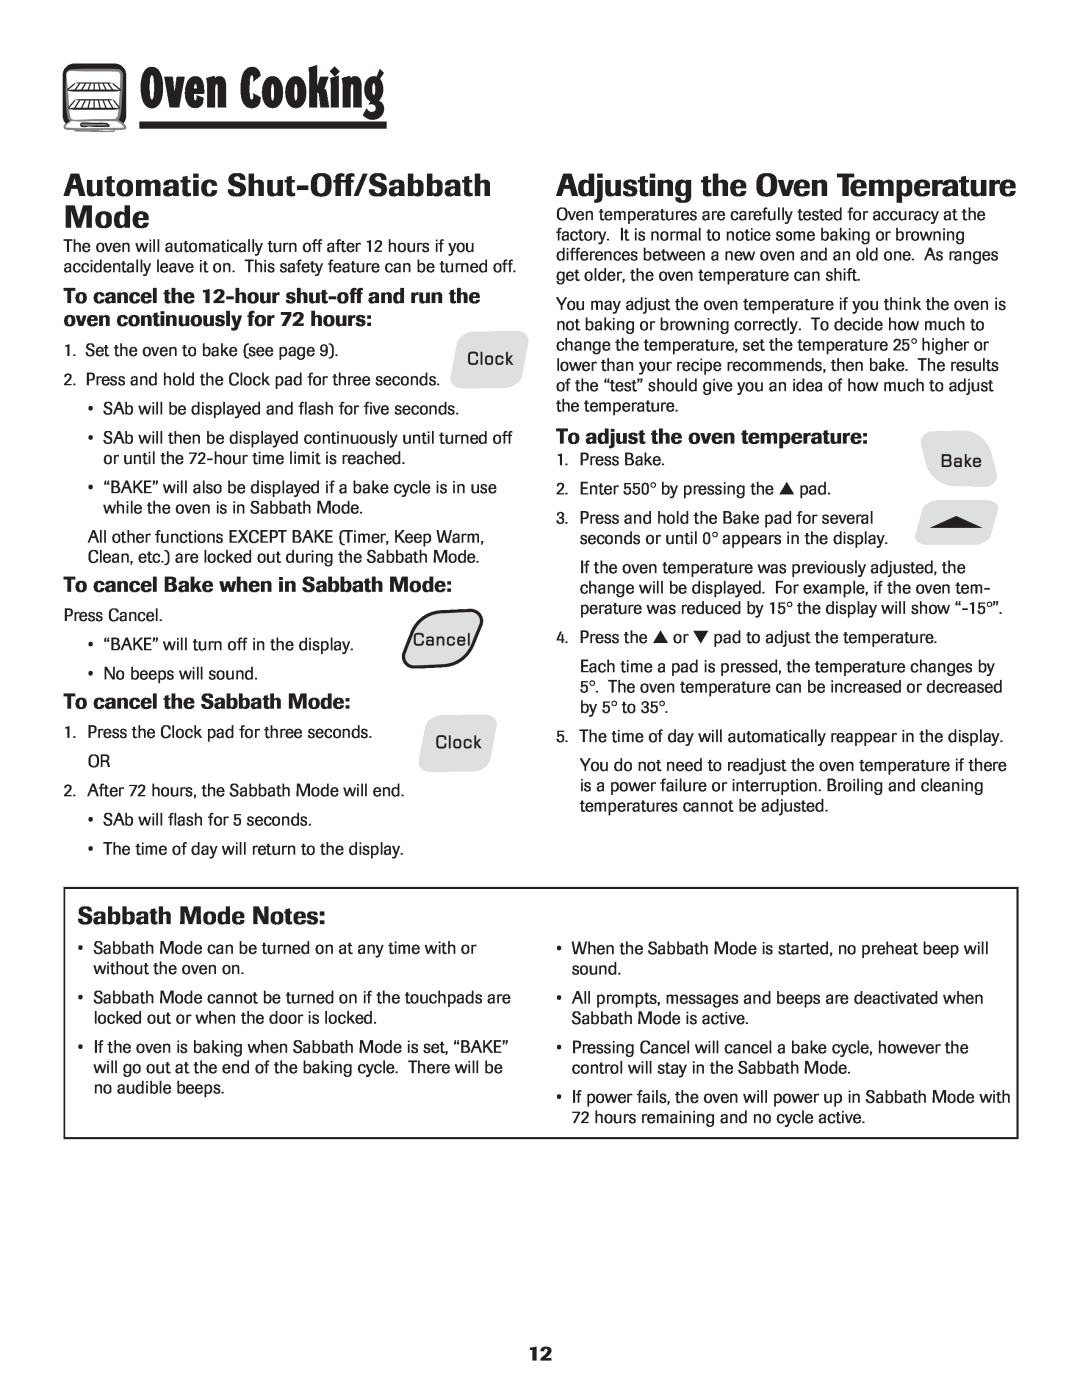 Amana Smoothtop Automatic Shut-Off/Sabbath Mode, Adjusting the Oven Temperature, Sabbath Mode Notes, Oven Cooking 